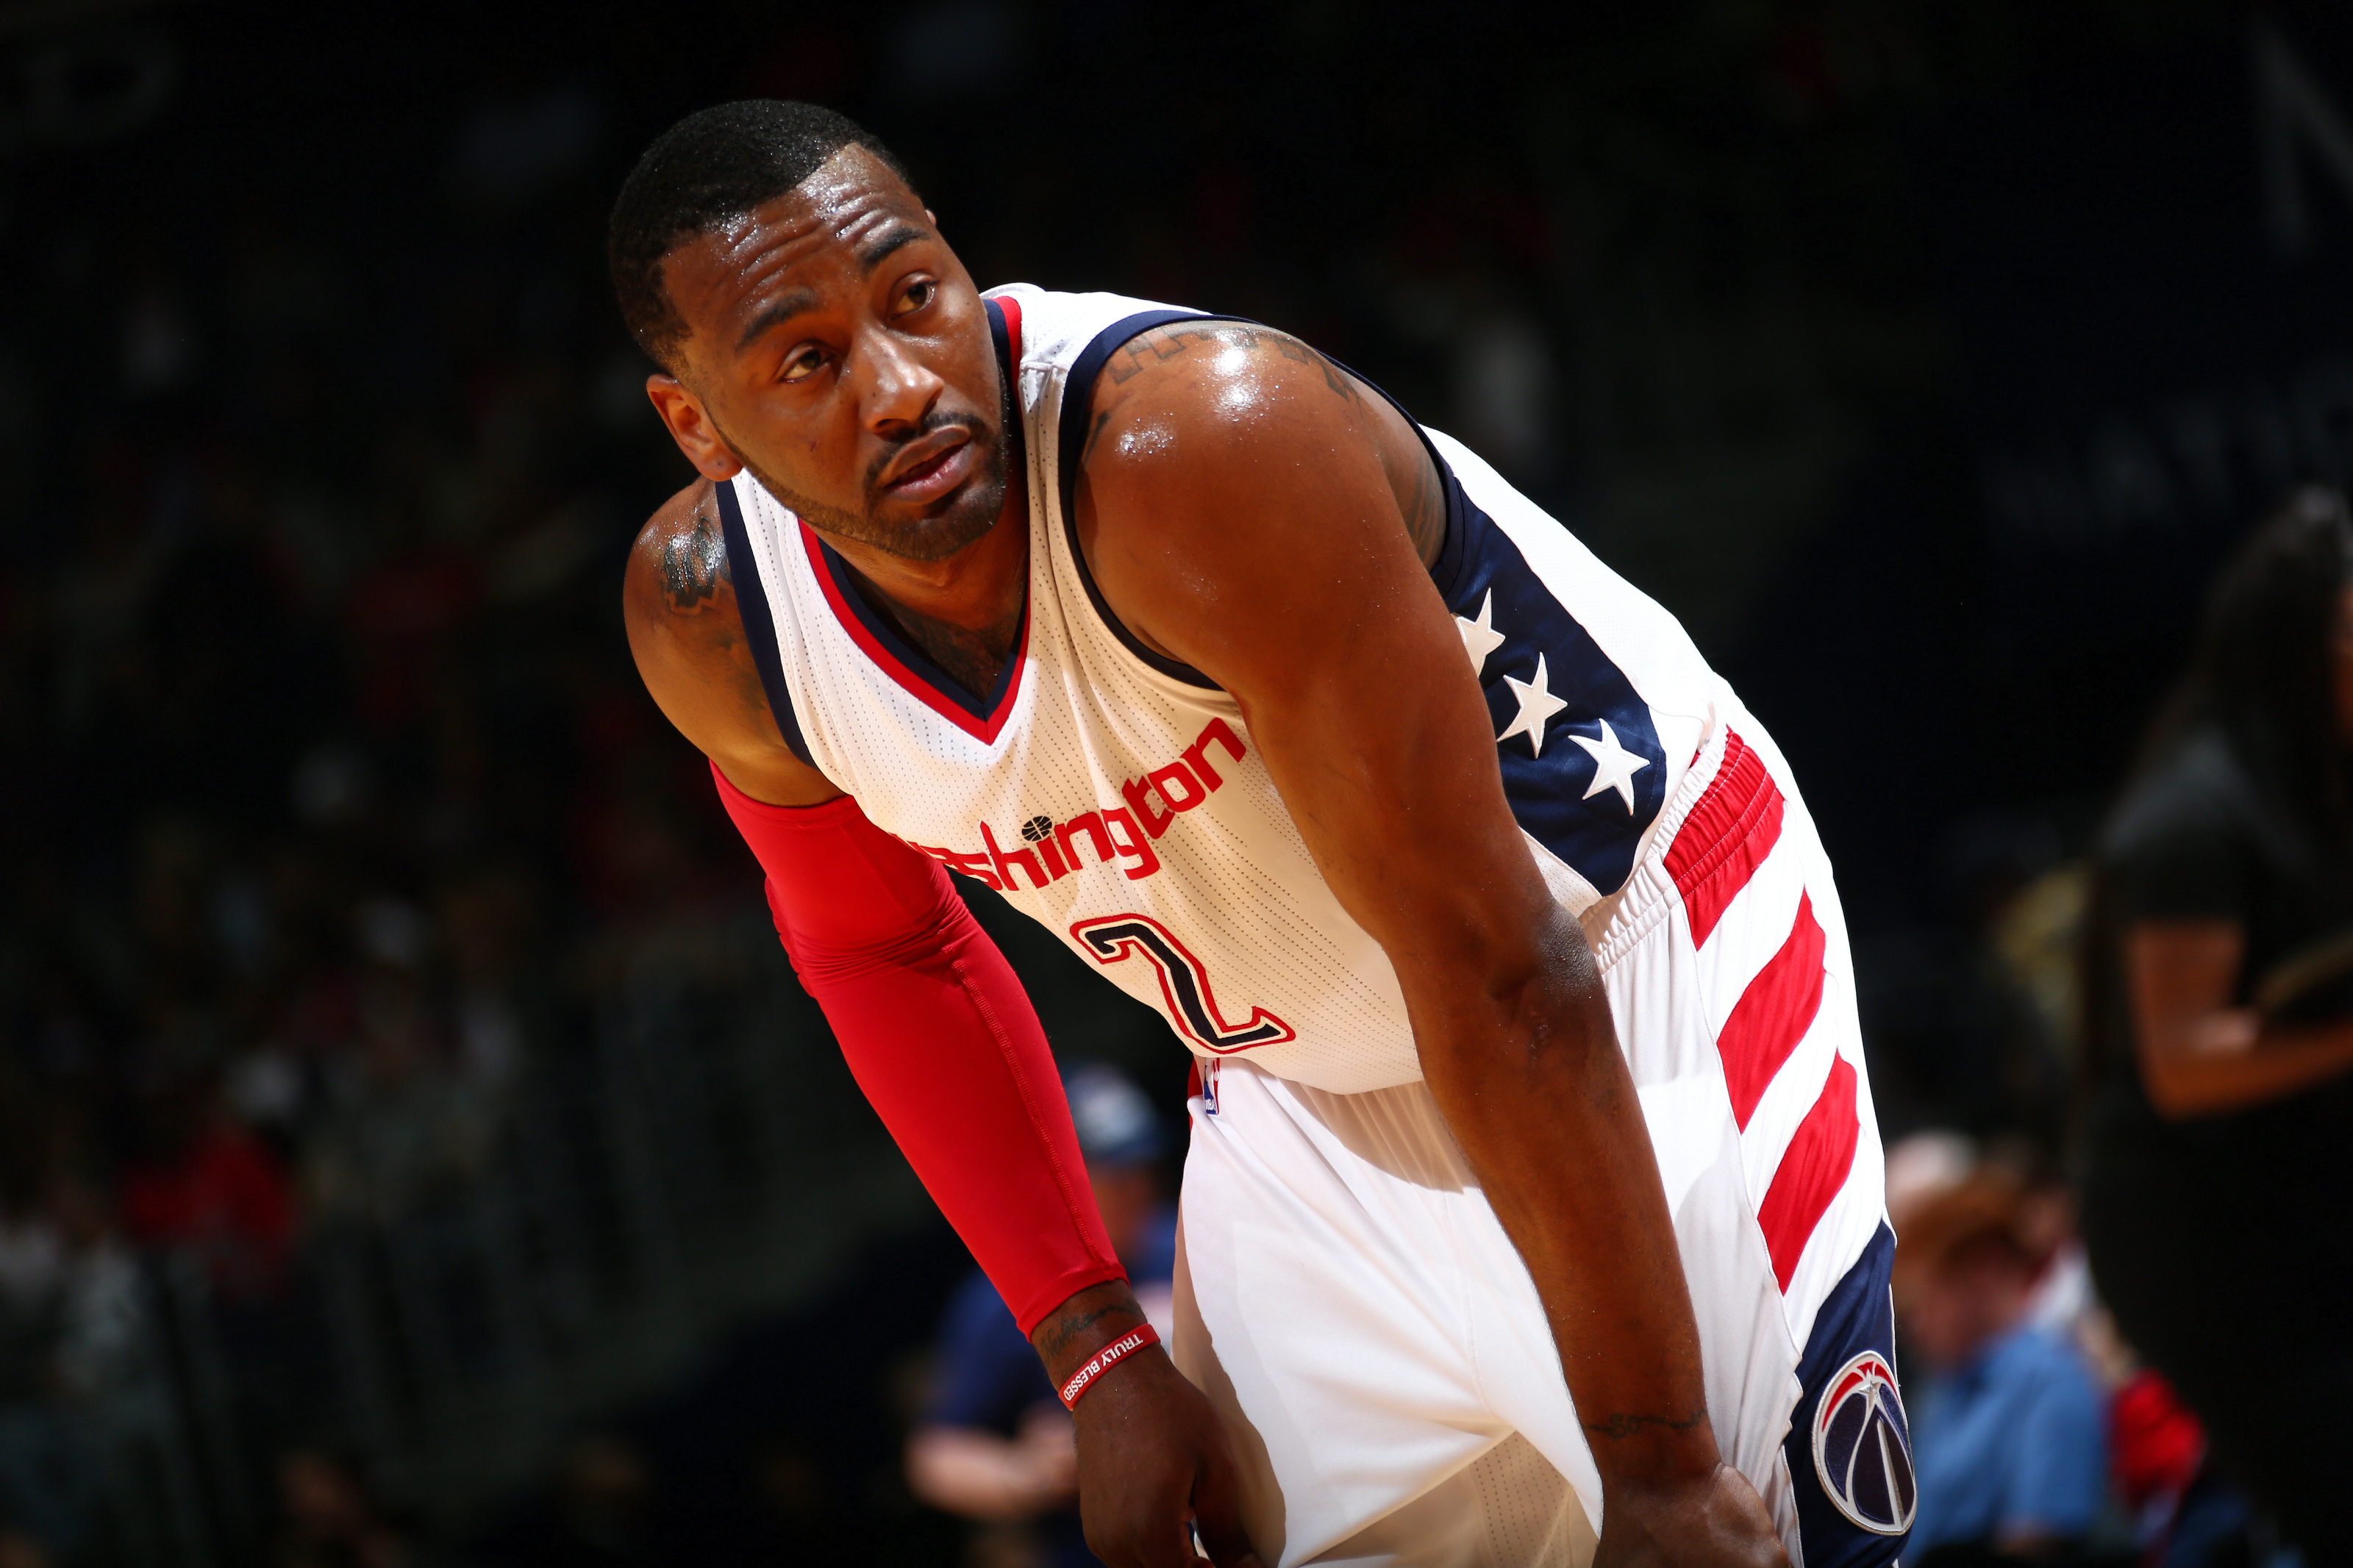 The Washington Wizards are bringing back the stars and stripes